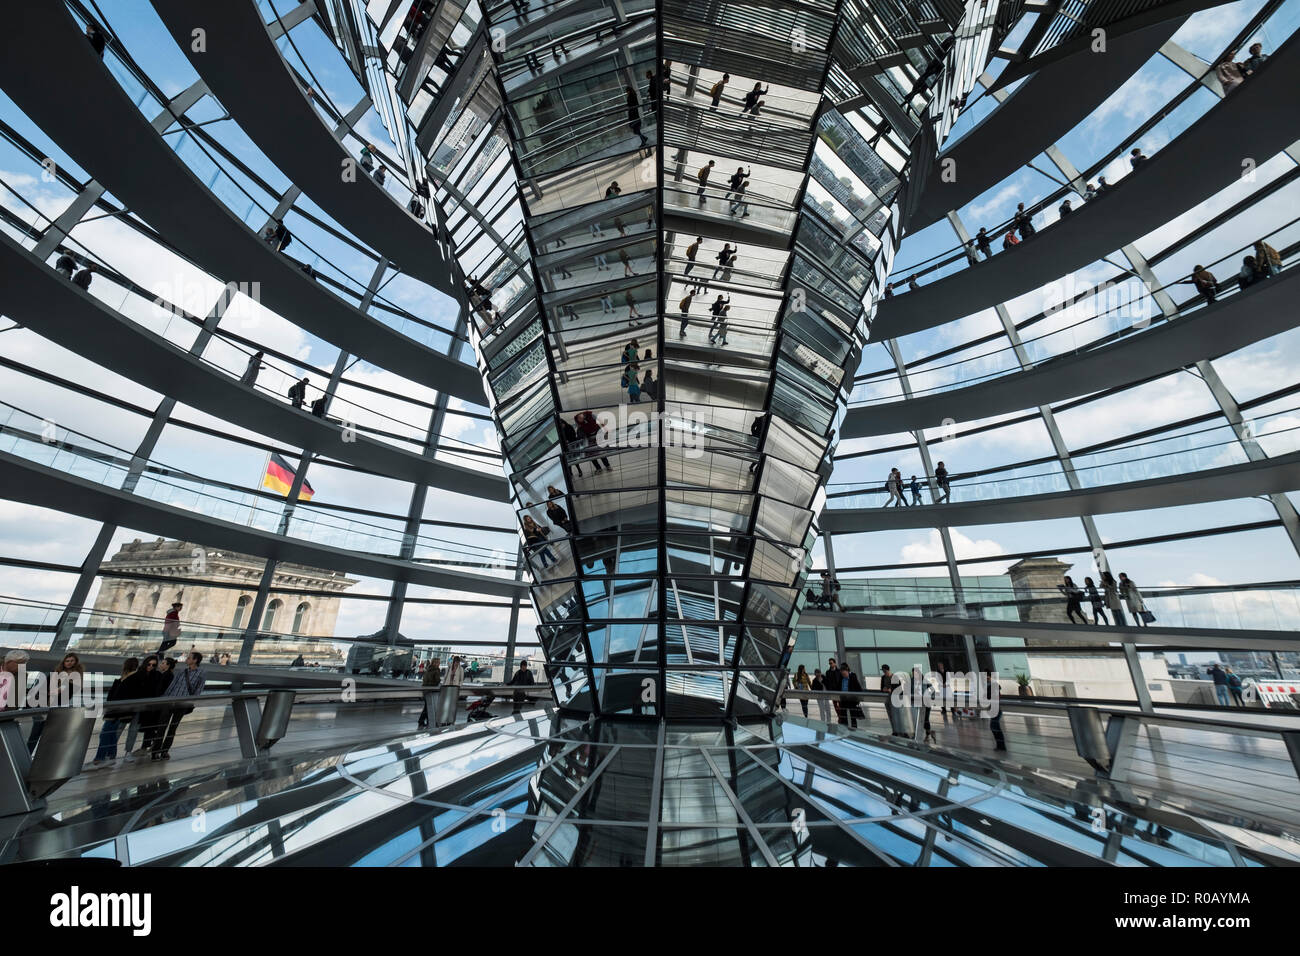 The Reichstag Dome, Berlin, Germany Stock Photo